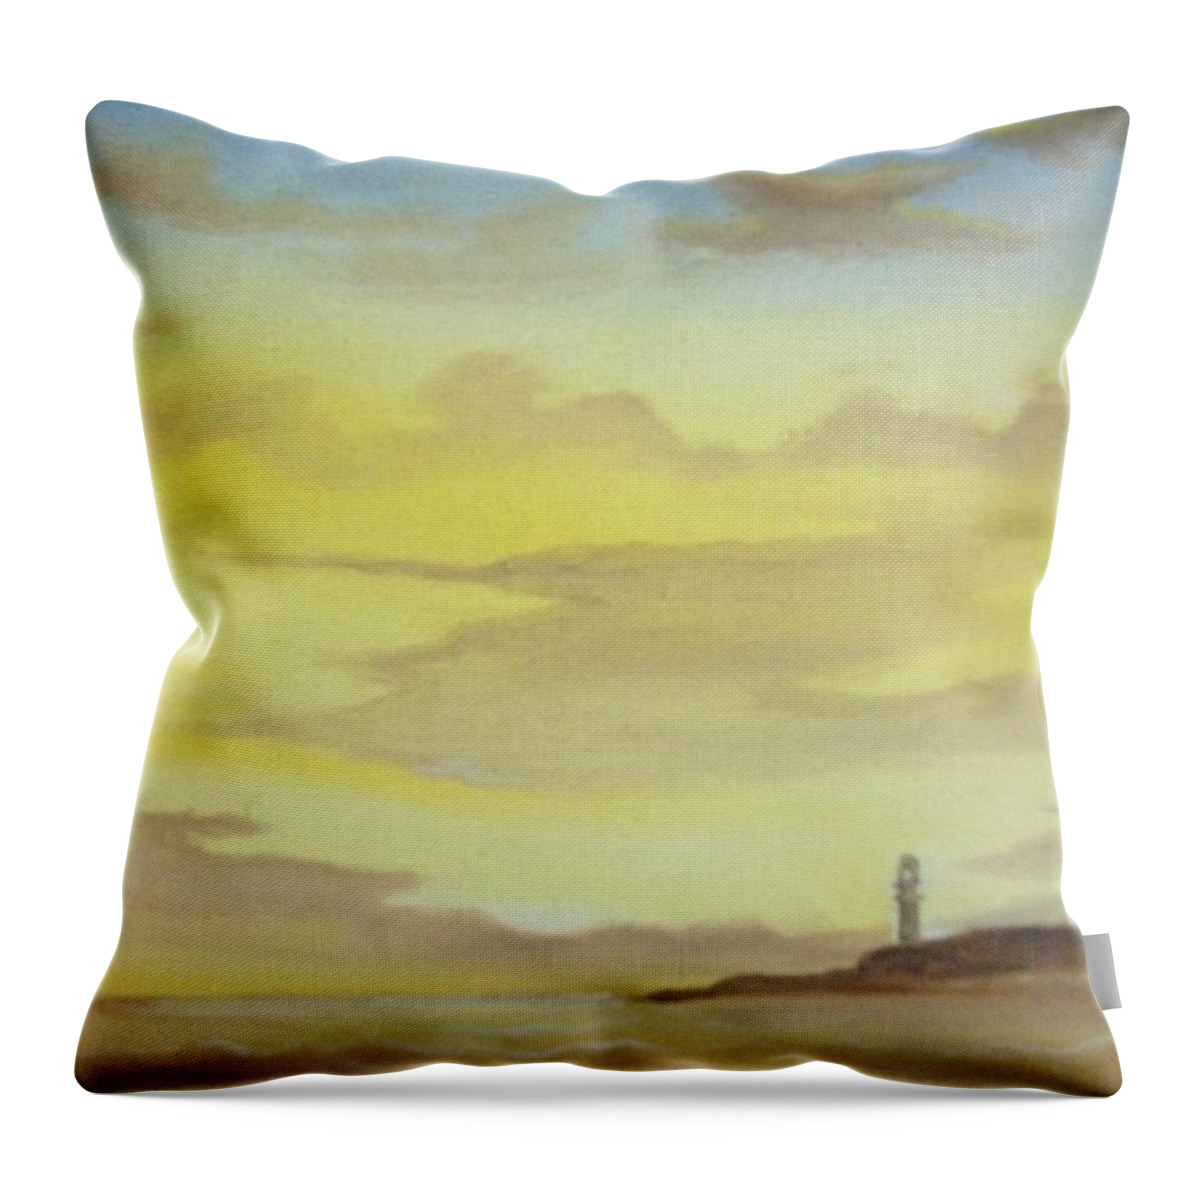 Lighthouse Throw Pillow featuring the painting Lighthouse In The Distance by Scott Easom